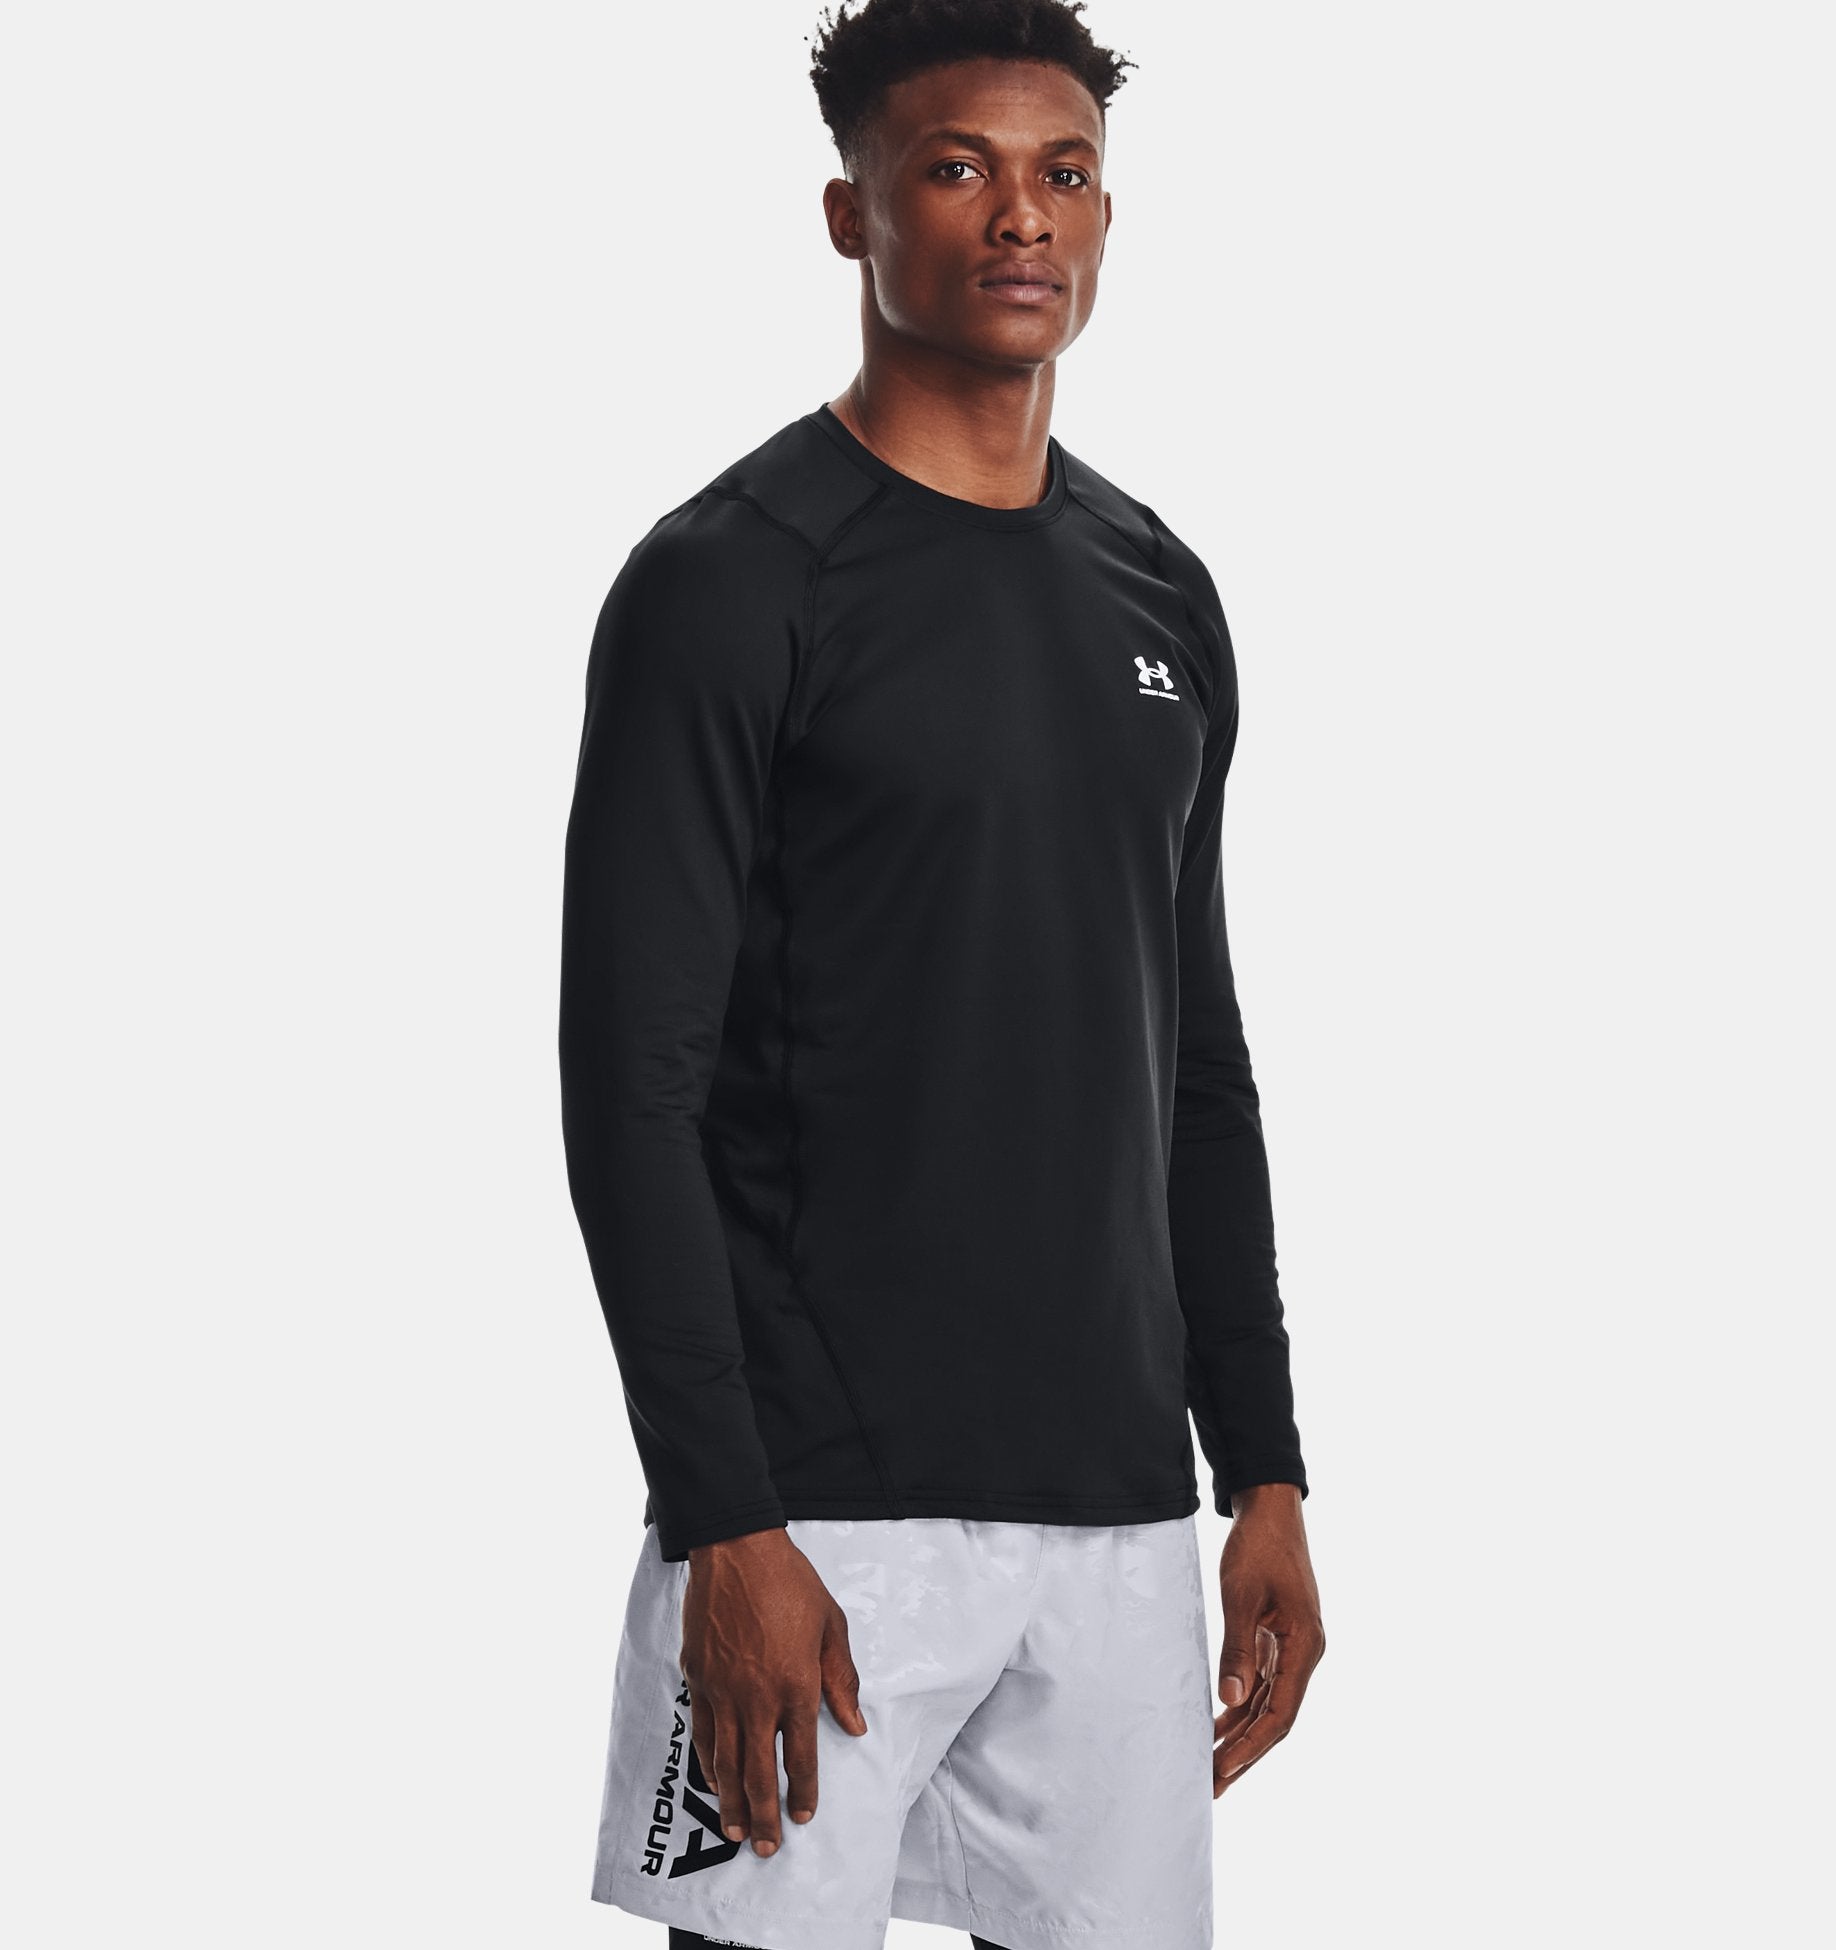 Under Armour Men's ColdGear Armour Fitted Crew Apparel Under Armour Black/White-001 Small 